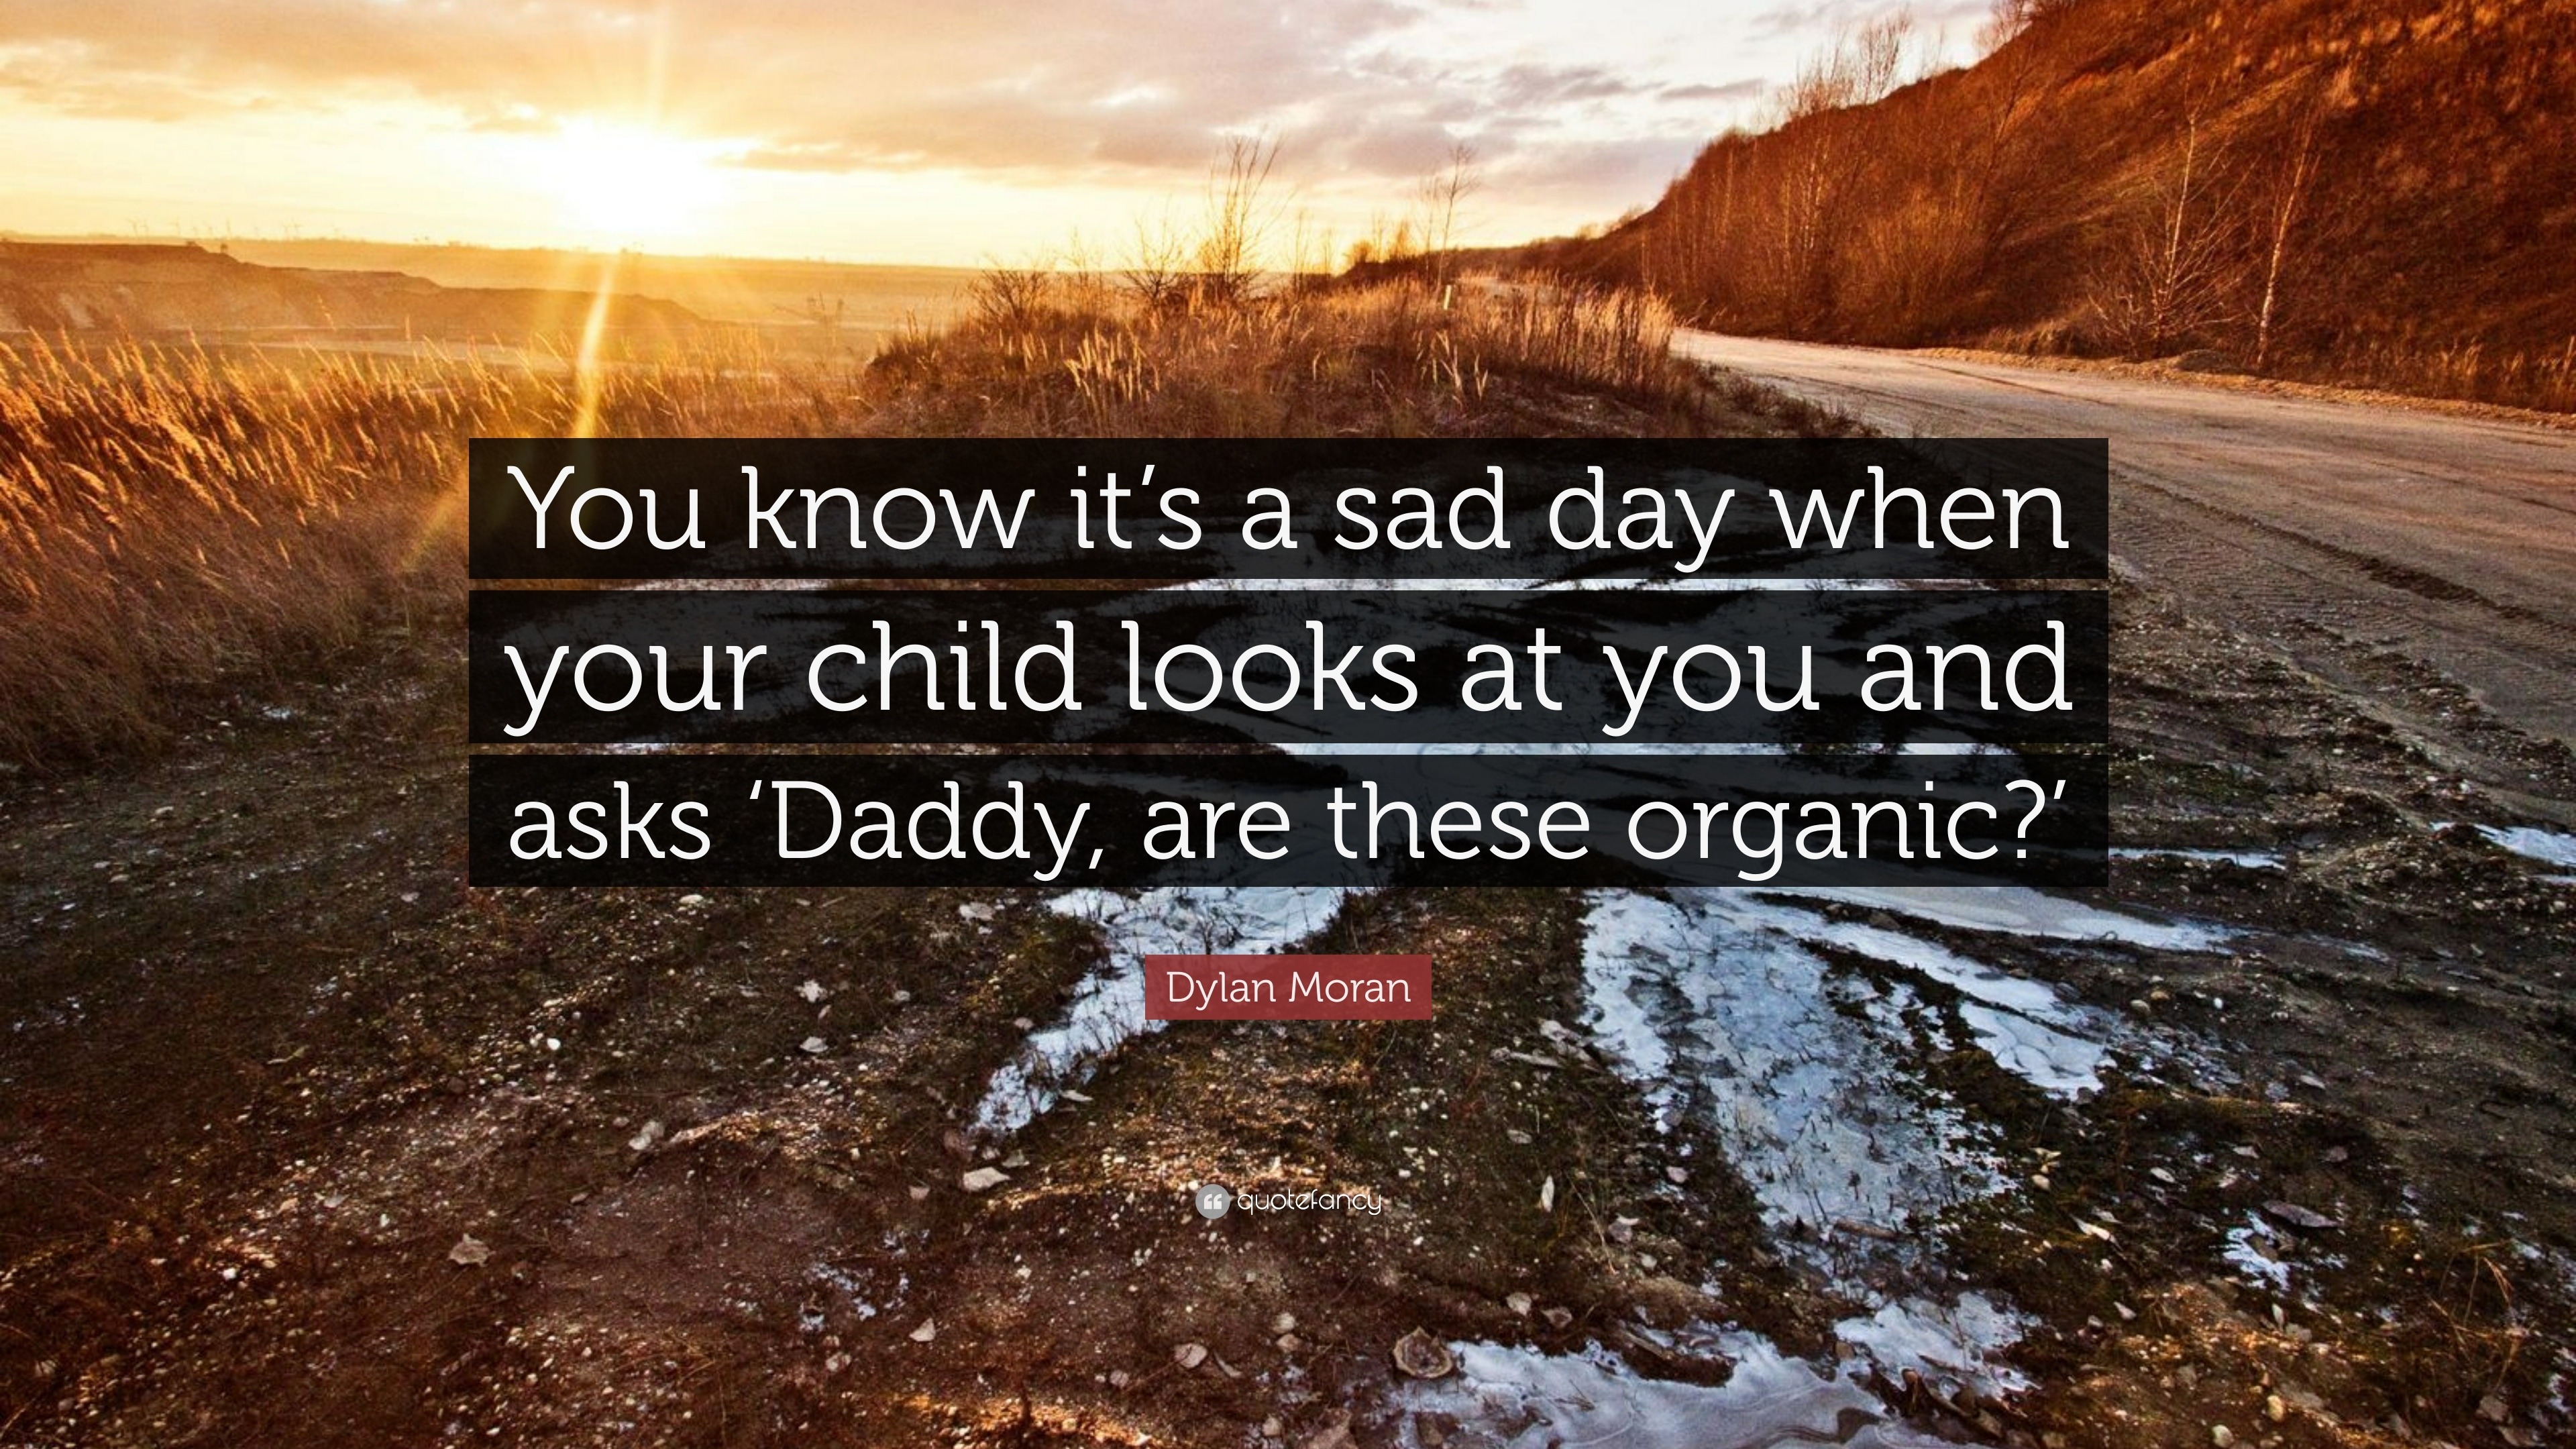 Dylan Moran Quote: “You know it’s a sad day when your child looks at